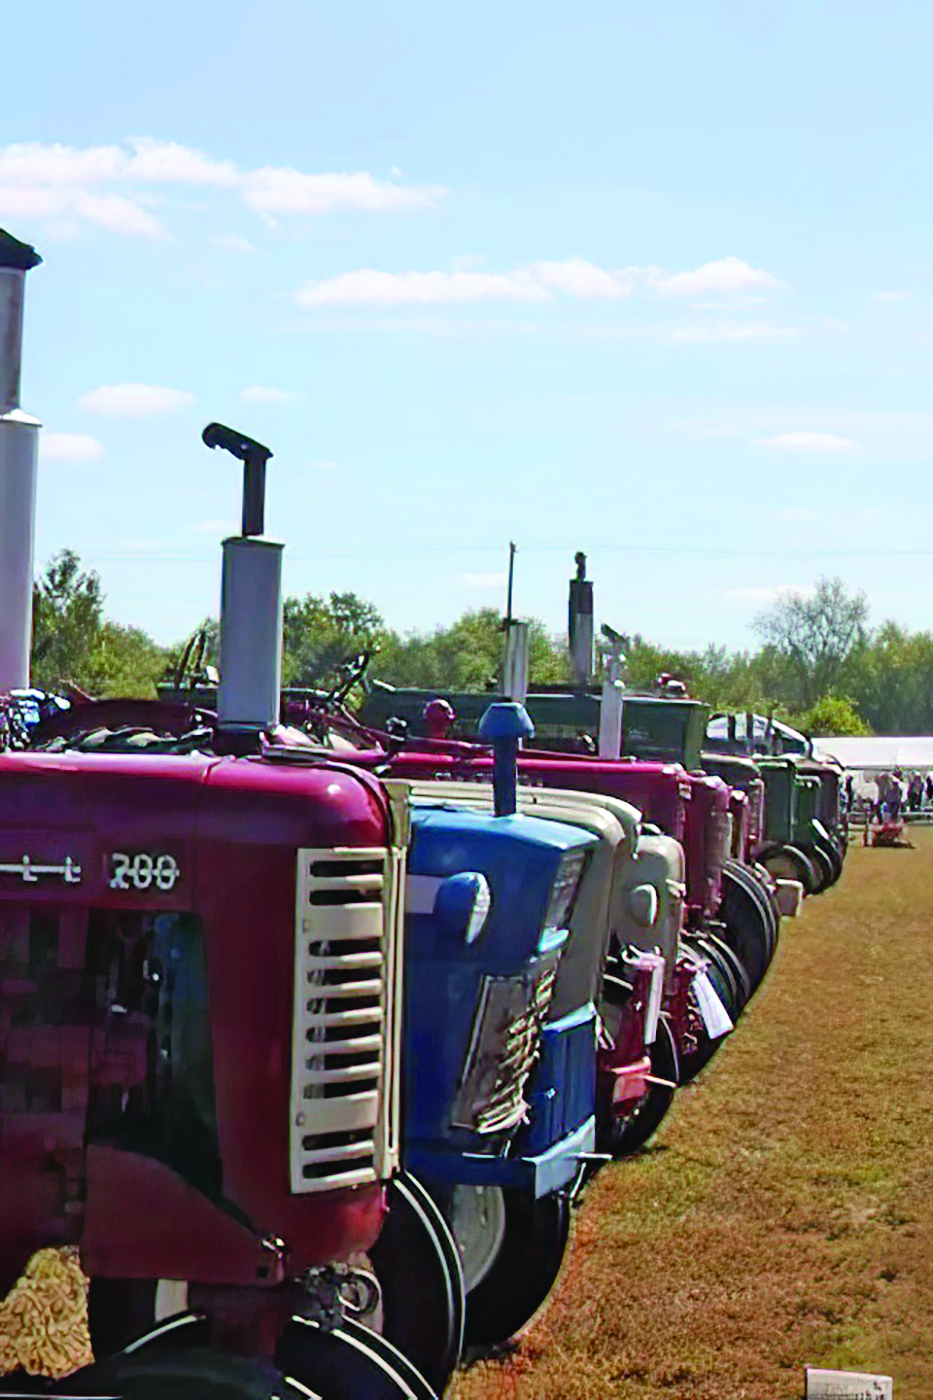 Greenup Old Tractor Engine and Machinery Show Oct. 5-7